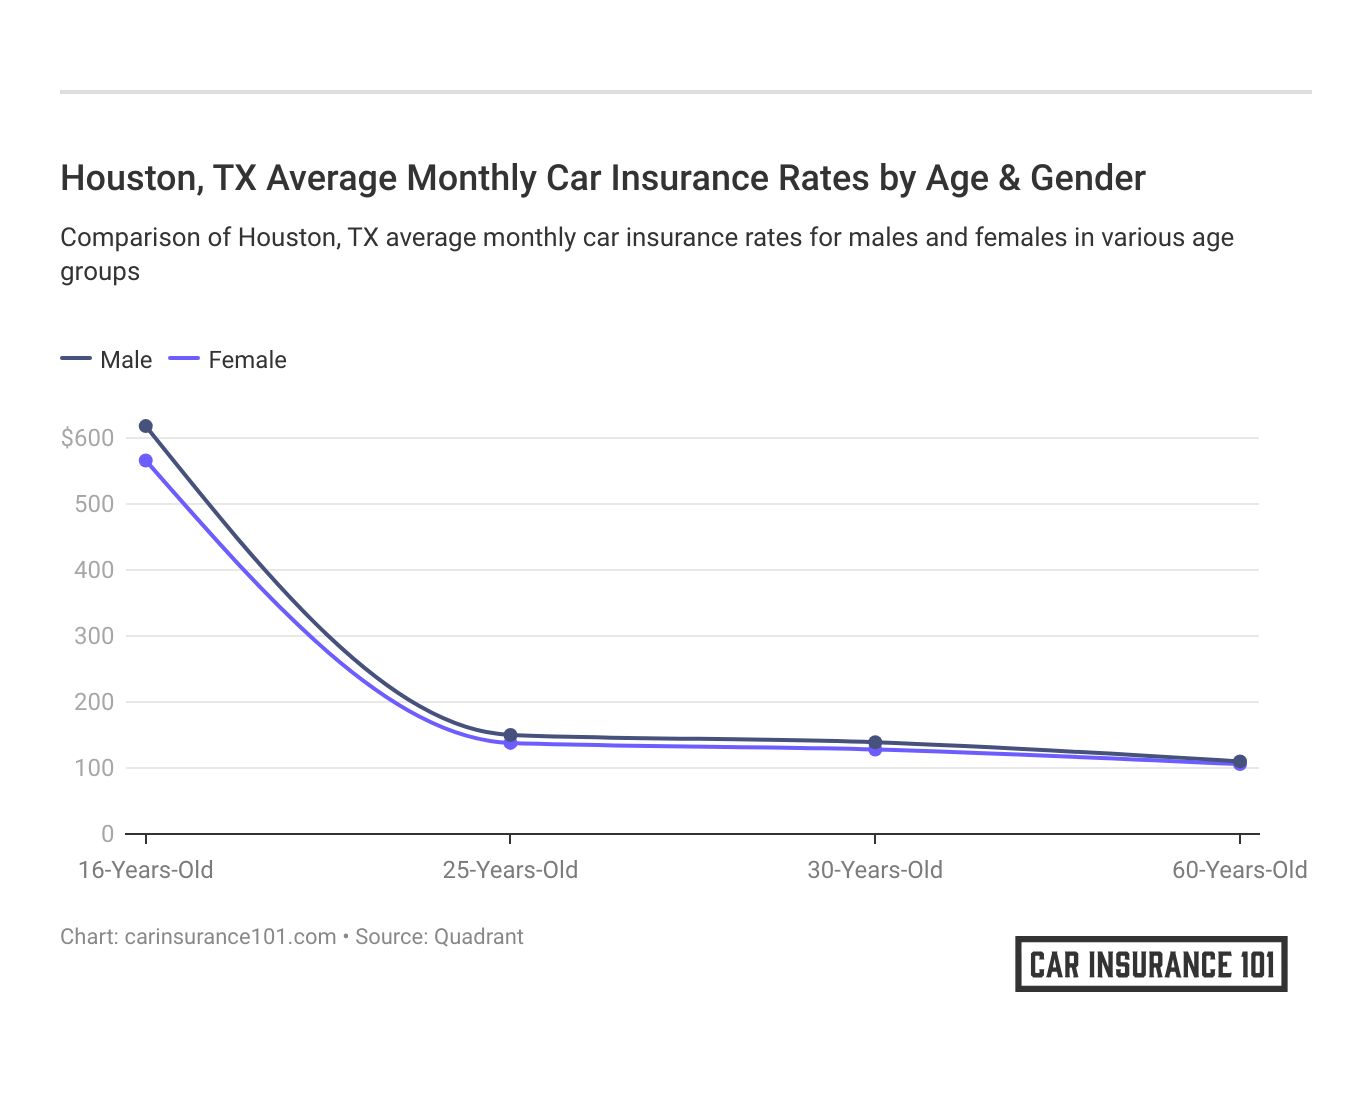 <h3>Houston, TX Average Monthly Car Insurance Rates by Age & Gender</h3>